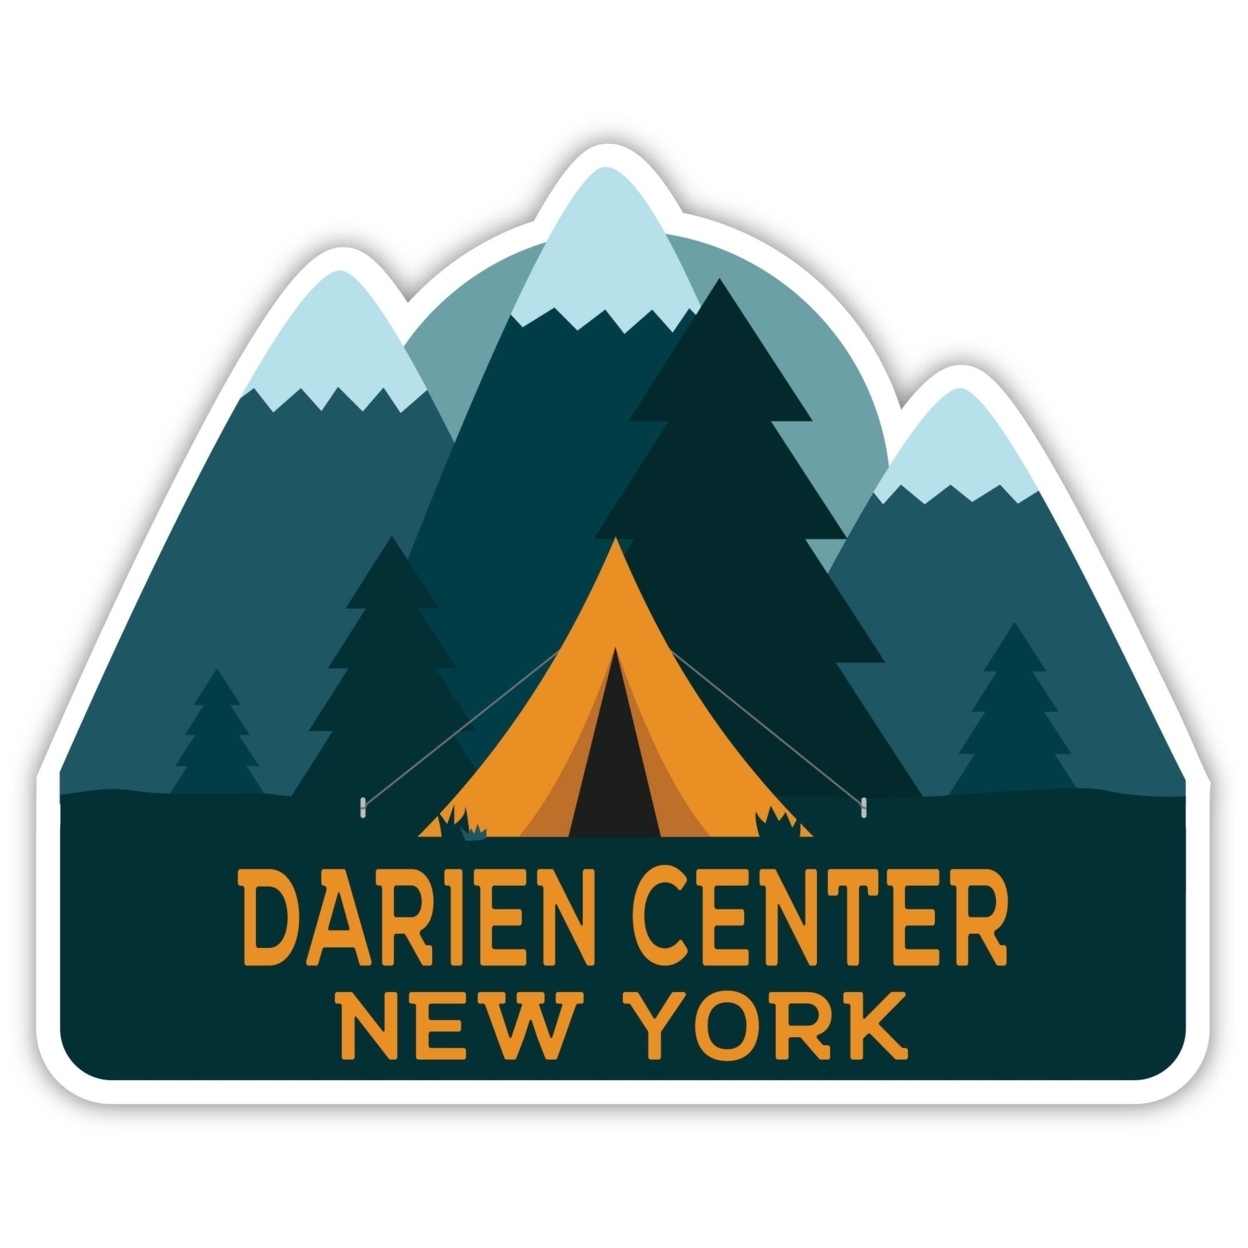 Darien Center New York Souvenir Decorative Stickers (Choose Theme And Size) - 4-Pack, 6-Inch, Bear